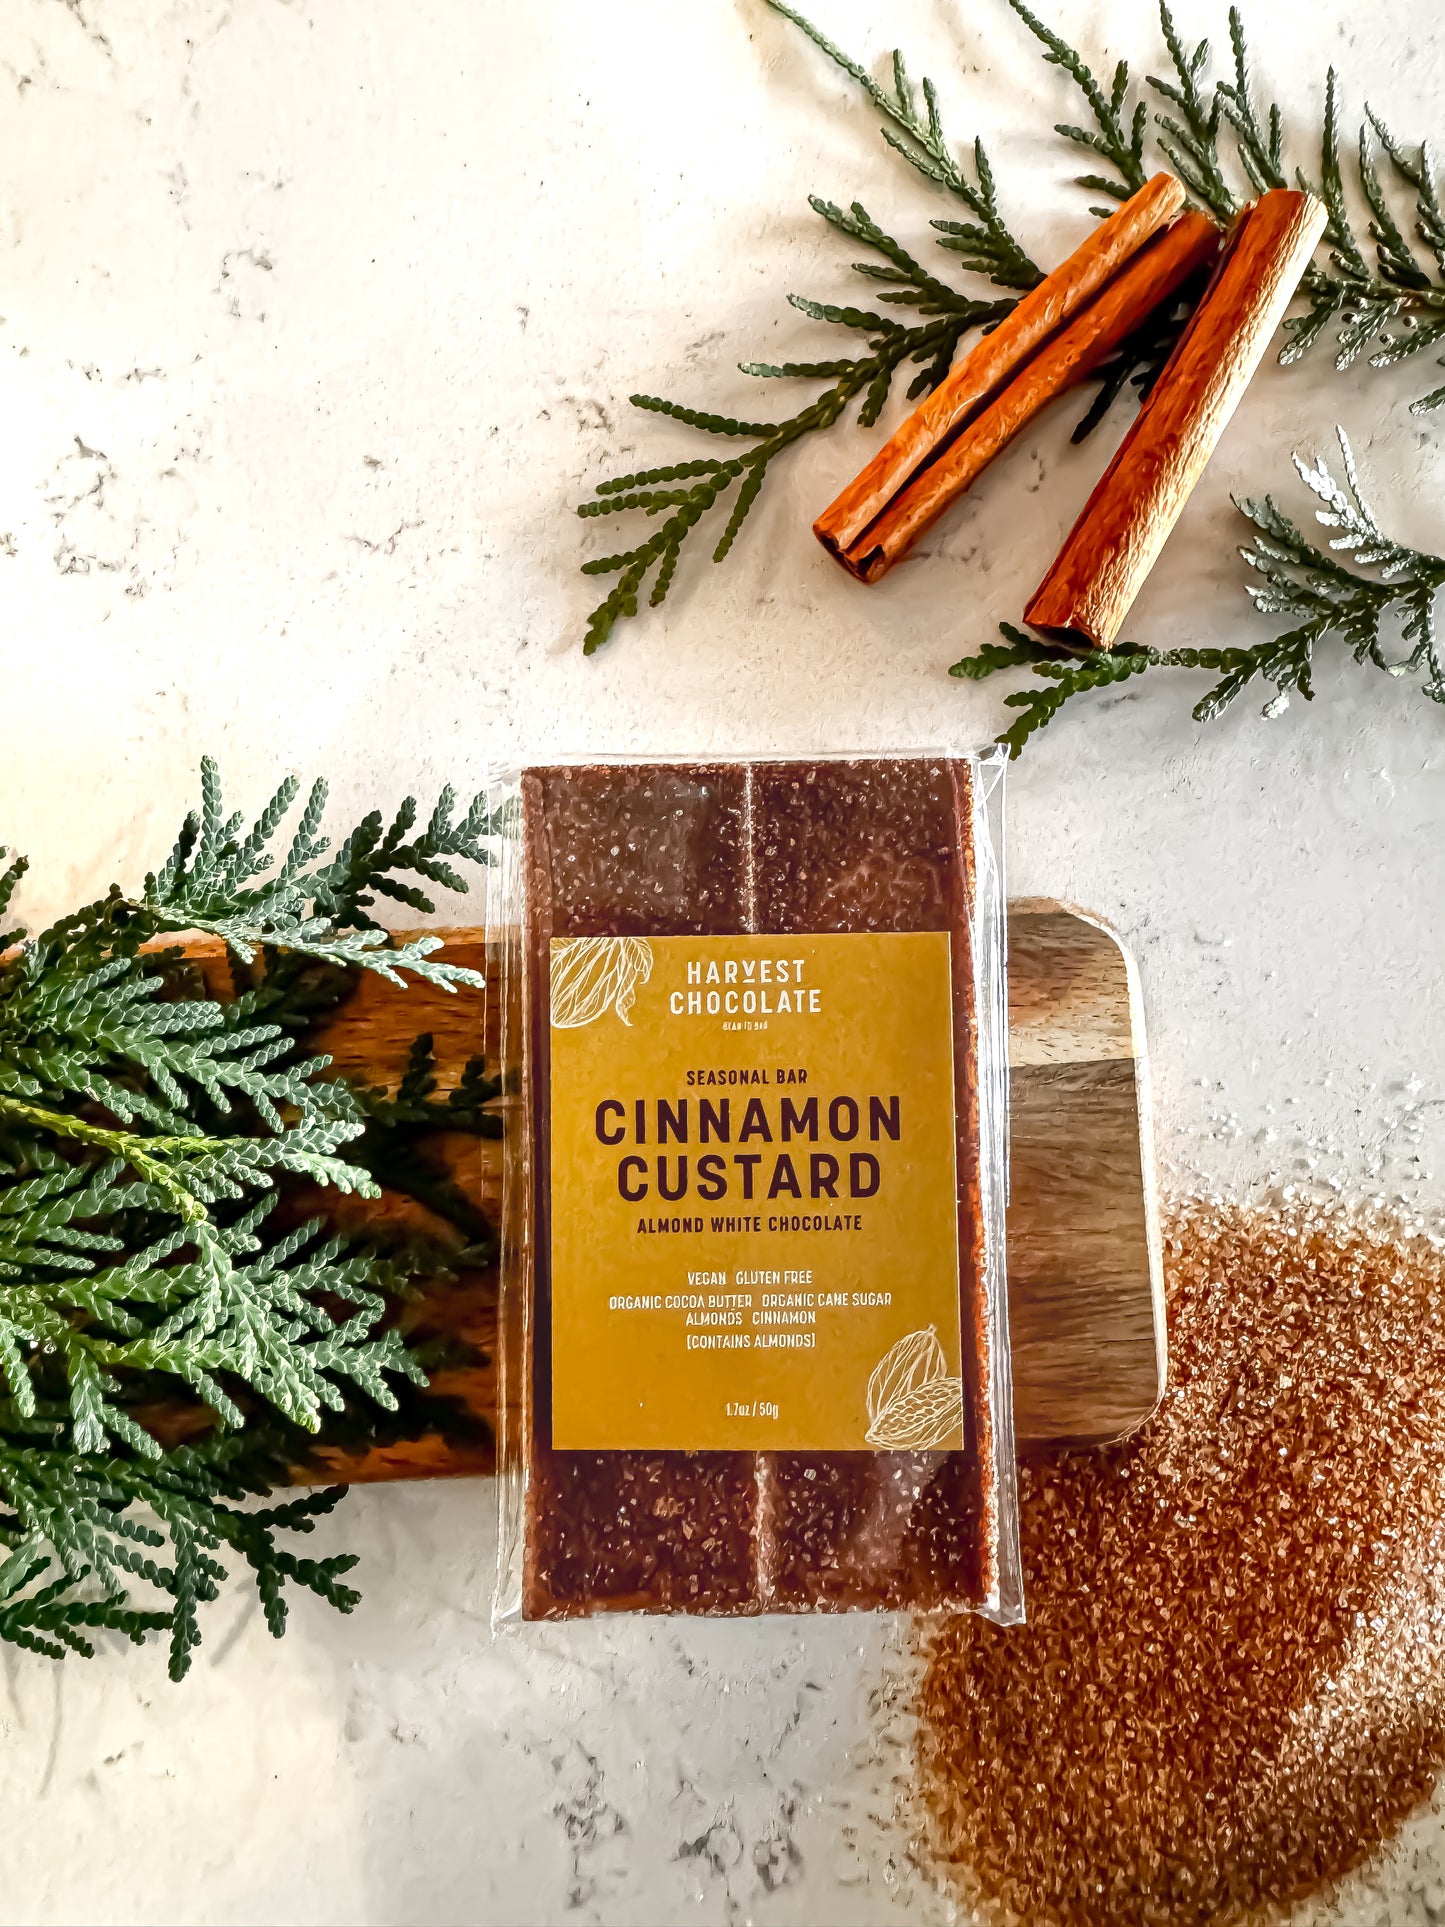 A bar of Harvest Chocolate's classic Cinnamon Custard chocolate placed on a wooden spatula, surrounded by scattered cinnamon sticks, sprinkled cocoa, and green fir branches on a light surface.